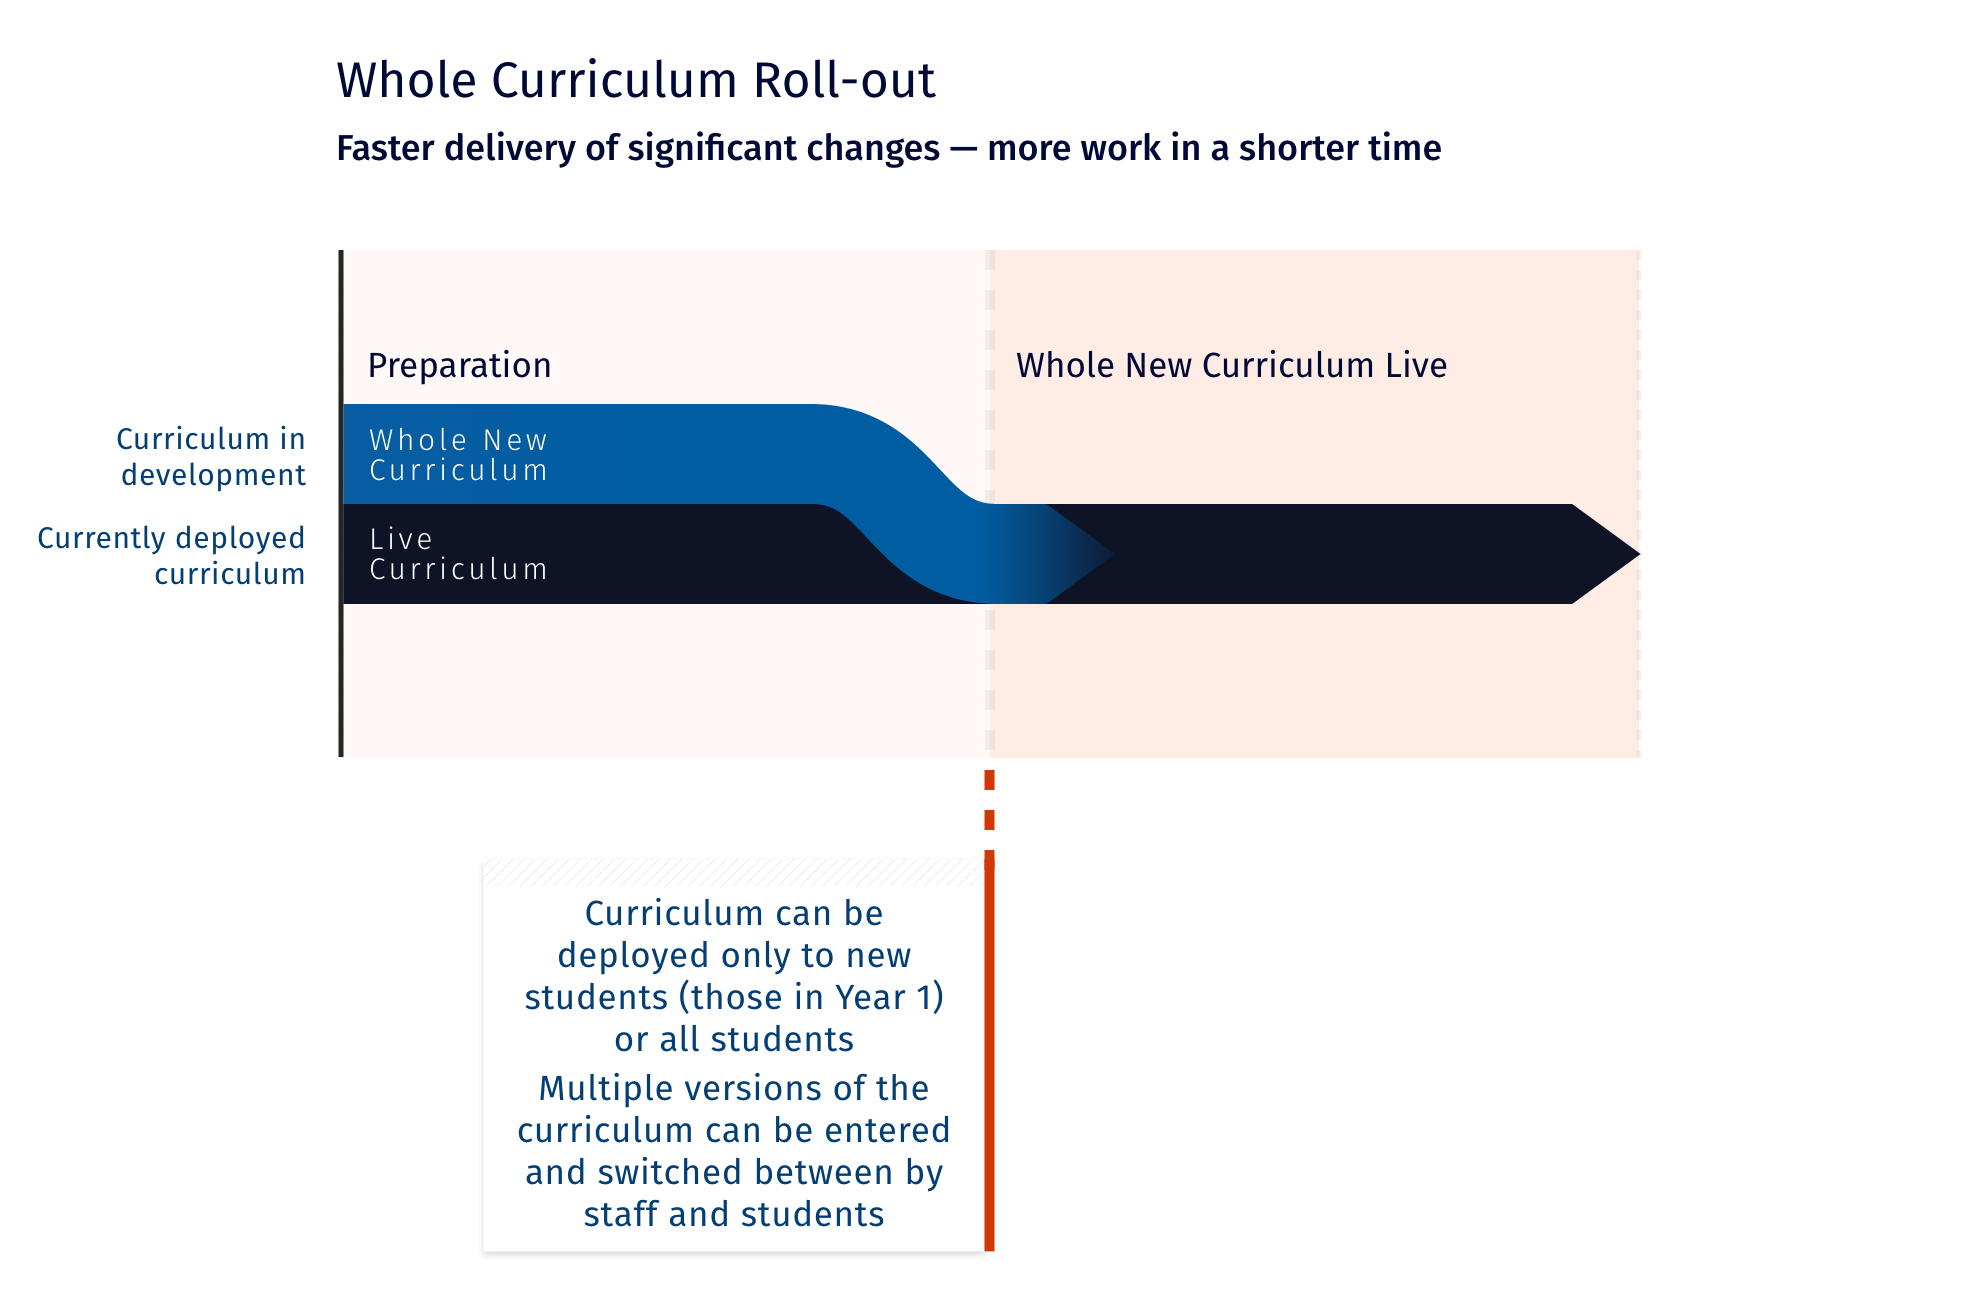 A diagram showing a flow of how the workload can be added all at once. The whole curriculum is prepared and then deployed all at once so that every year is on a new curriculum. This allows faster delivery of significant changes, more work in a shorter time. A box says Curriculum can be deployed only to new students (those in Year 1) or all students  Multiple versions of the curriculum can be entered and switched between by staff and students